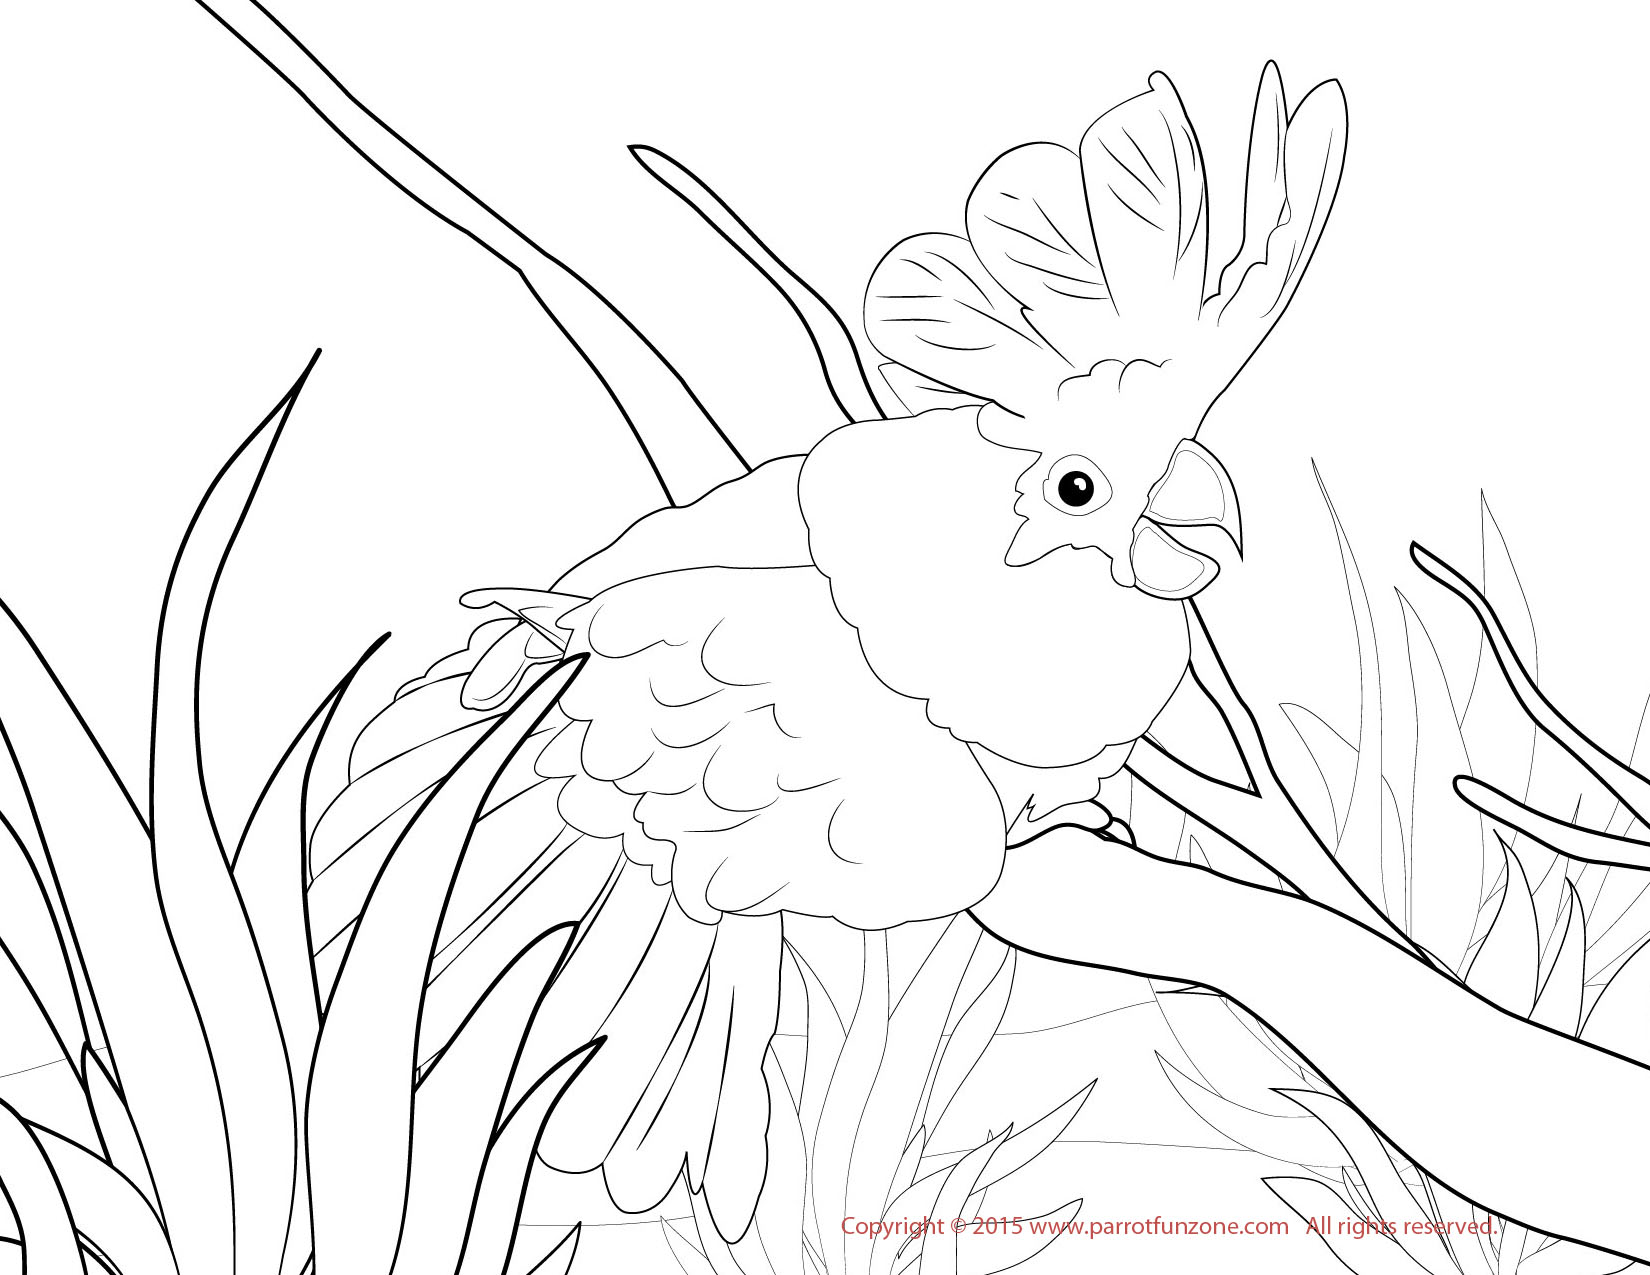 White Cockatoo coloring #15, Download drawings